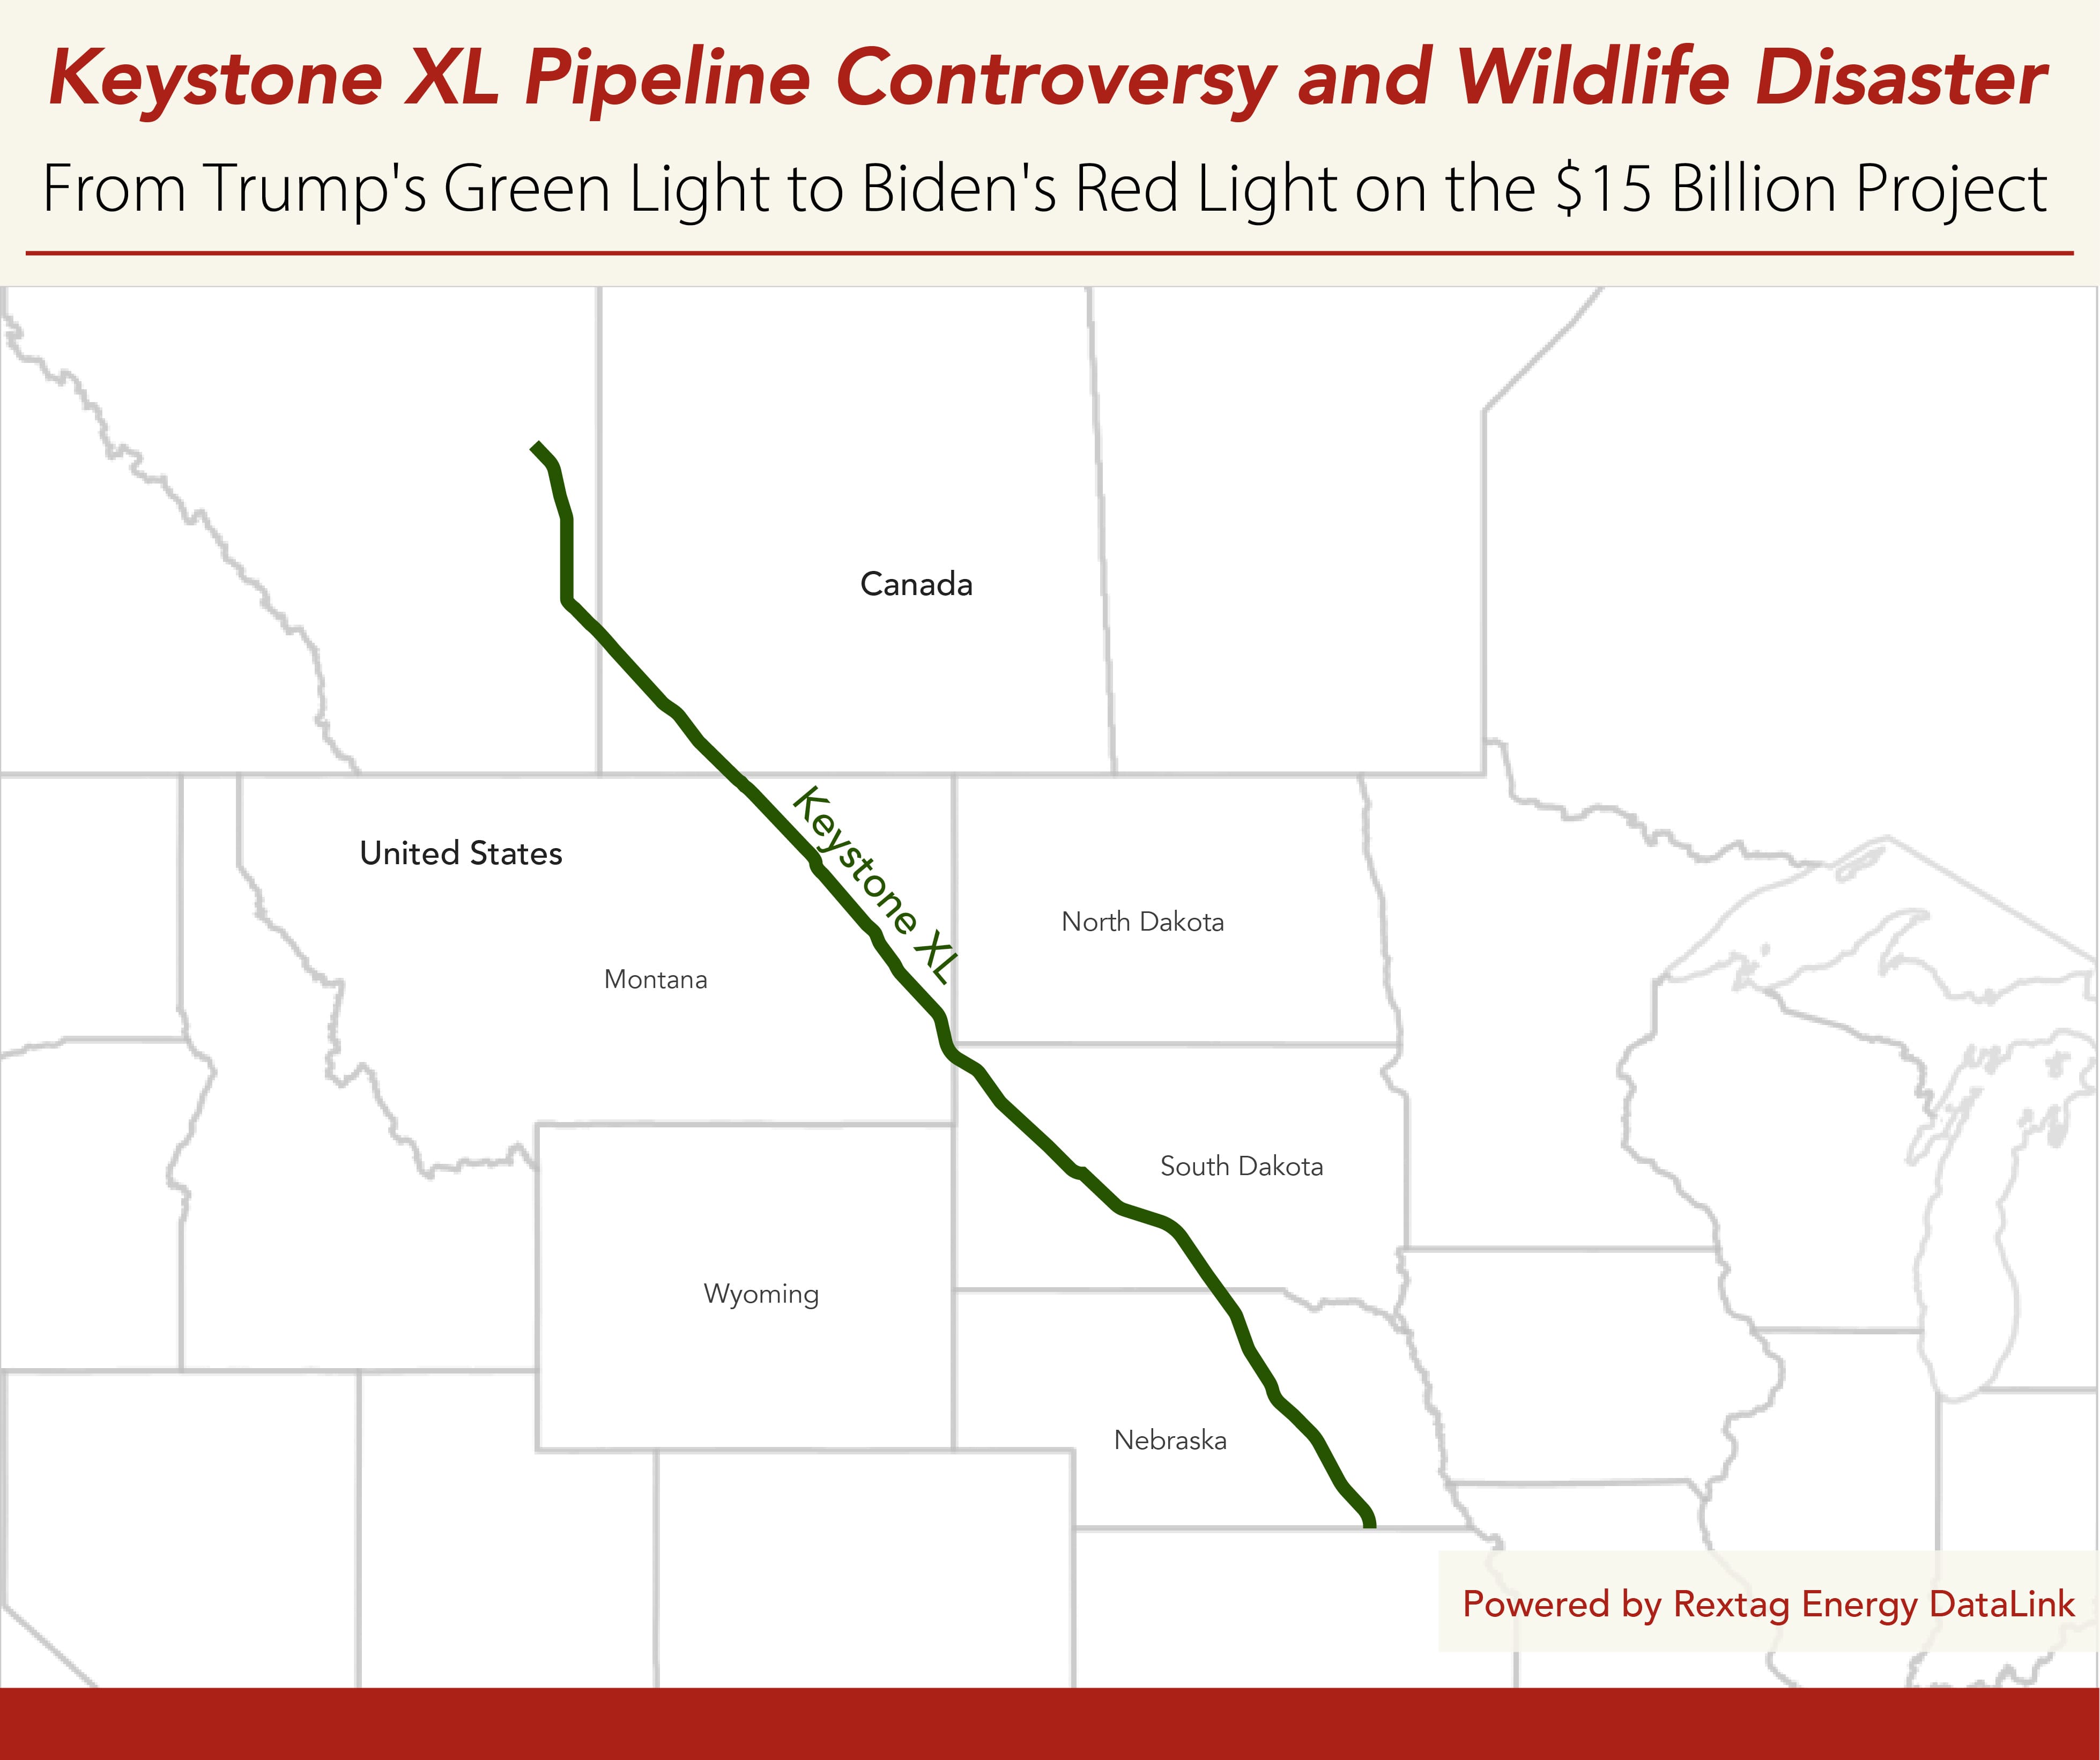 Keystone-XL-Pipeline-Controversy-and-Wildlife-Disaster-From-rump-s-Green-Light-to-Biden-s-Red-Light-on-the-15-Billion-Project